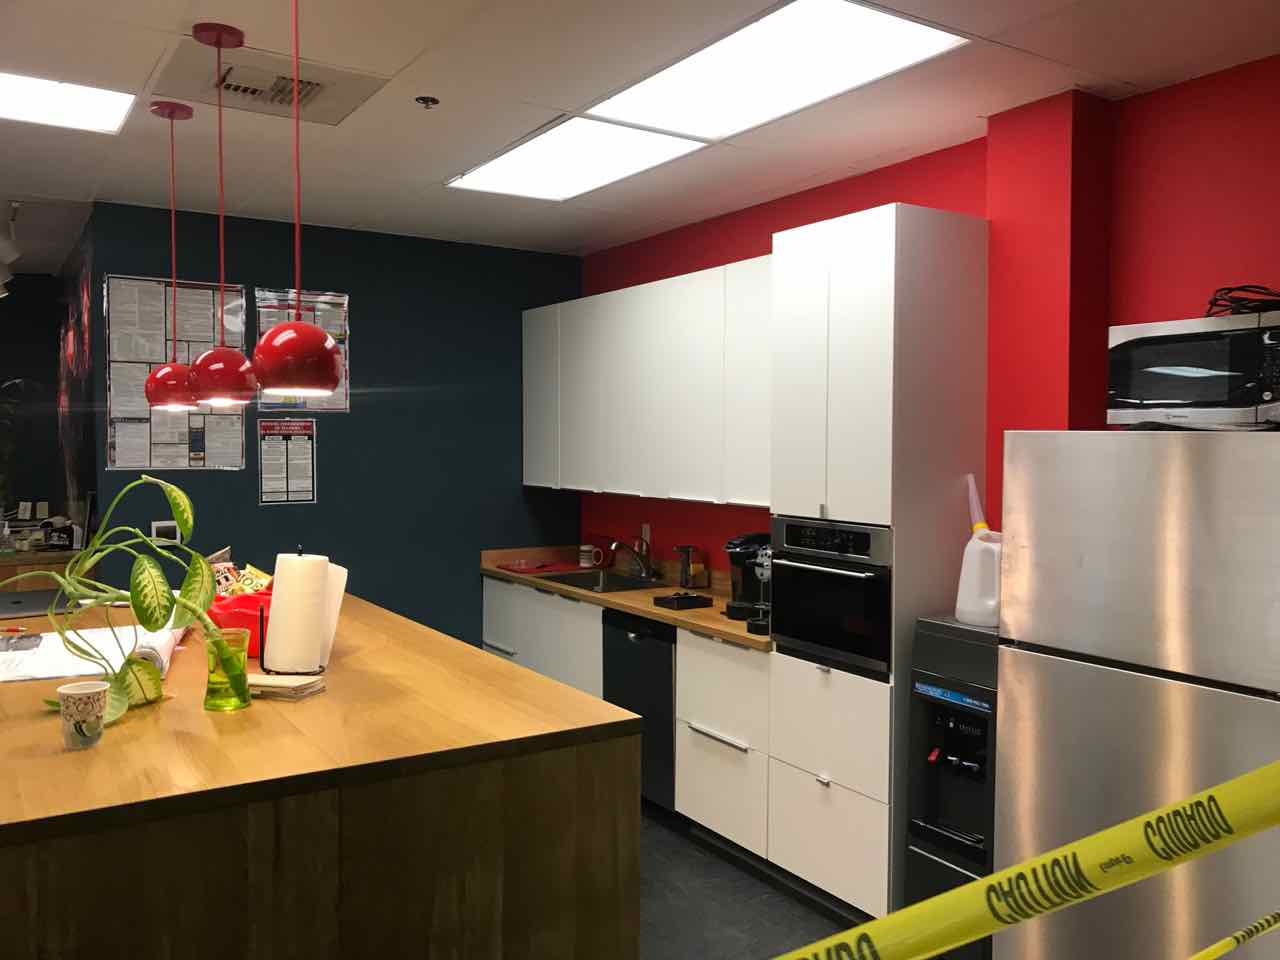  Commercial kitchen inside office suite for 50 employees. Complete remodel and upgrade, including cabinets, plumbing, custom island, painting and flooring. 